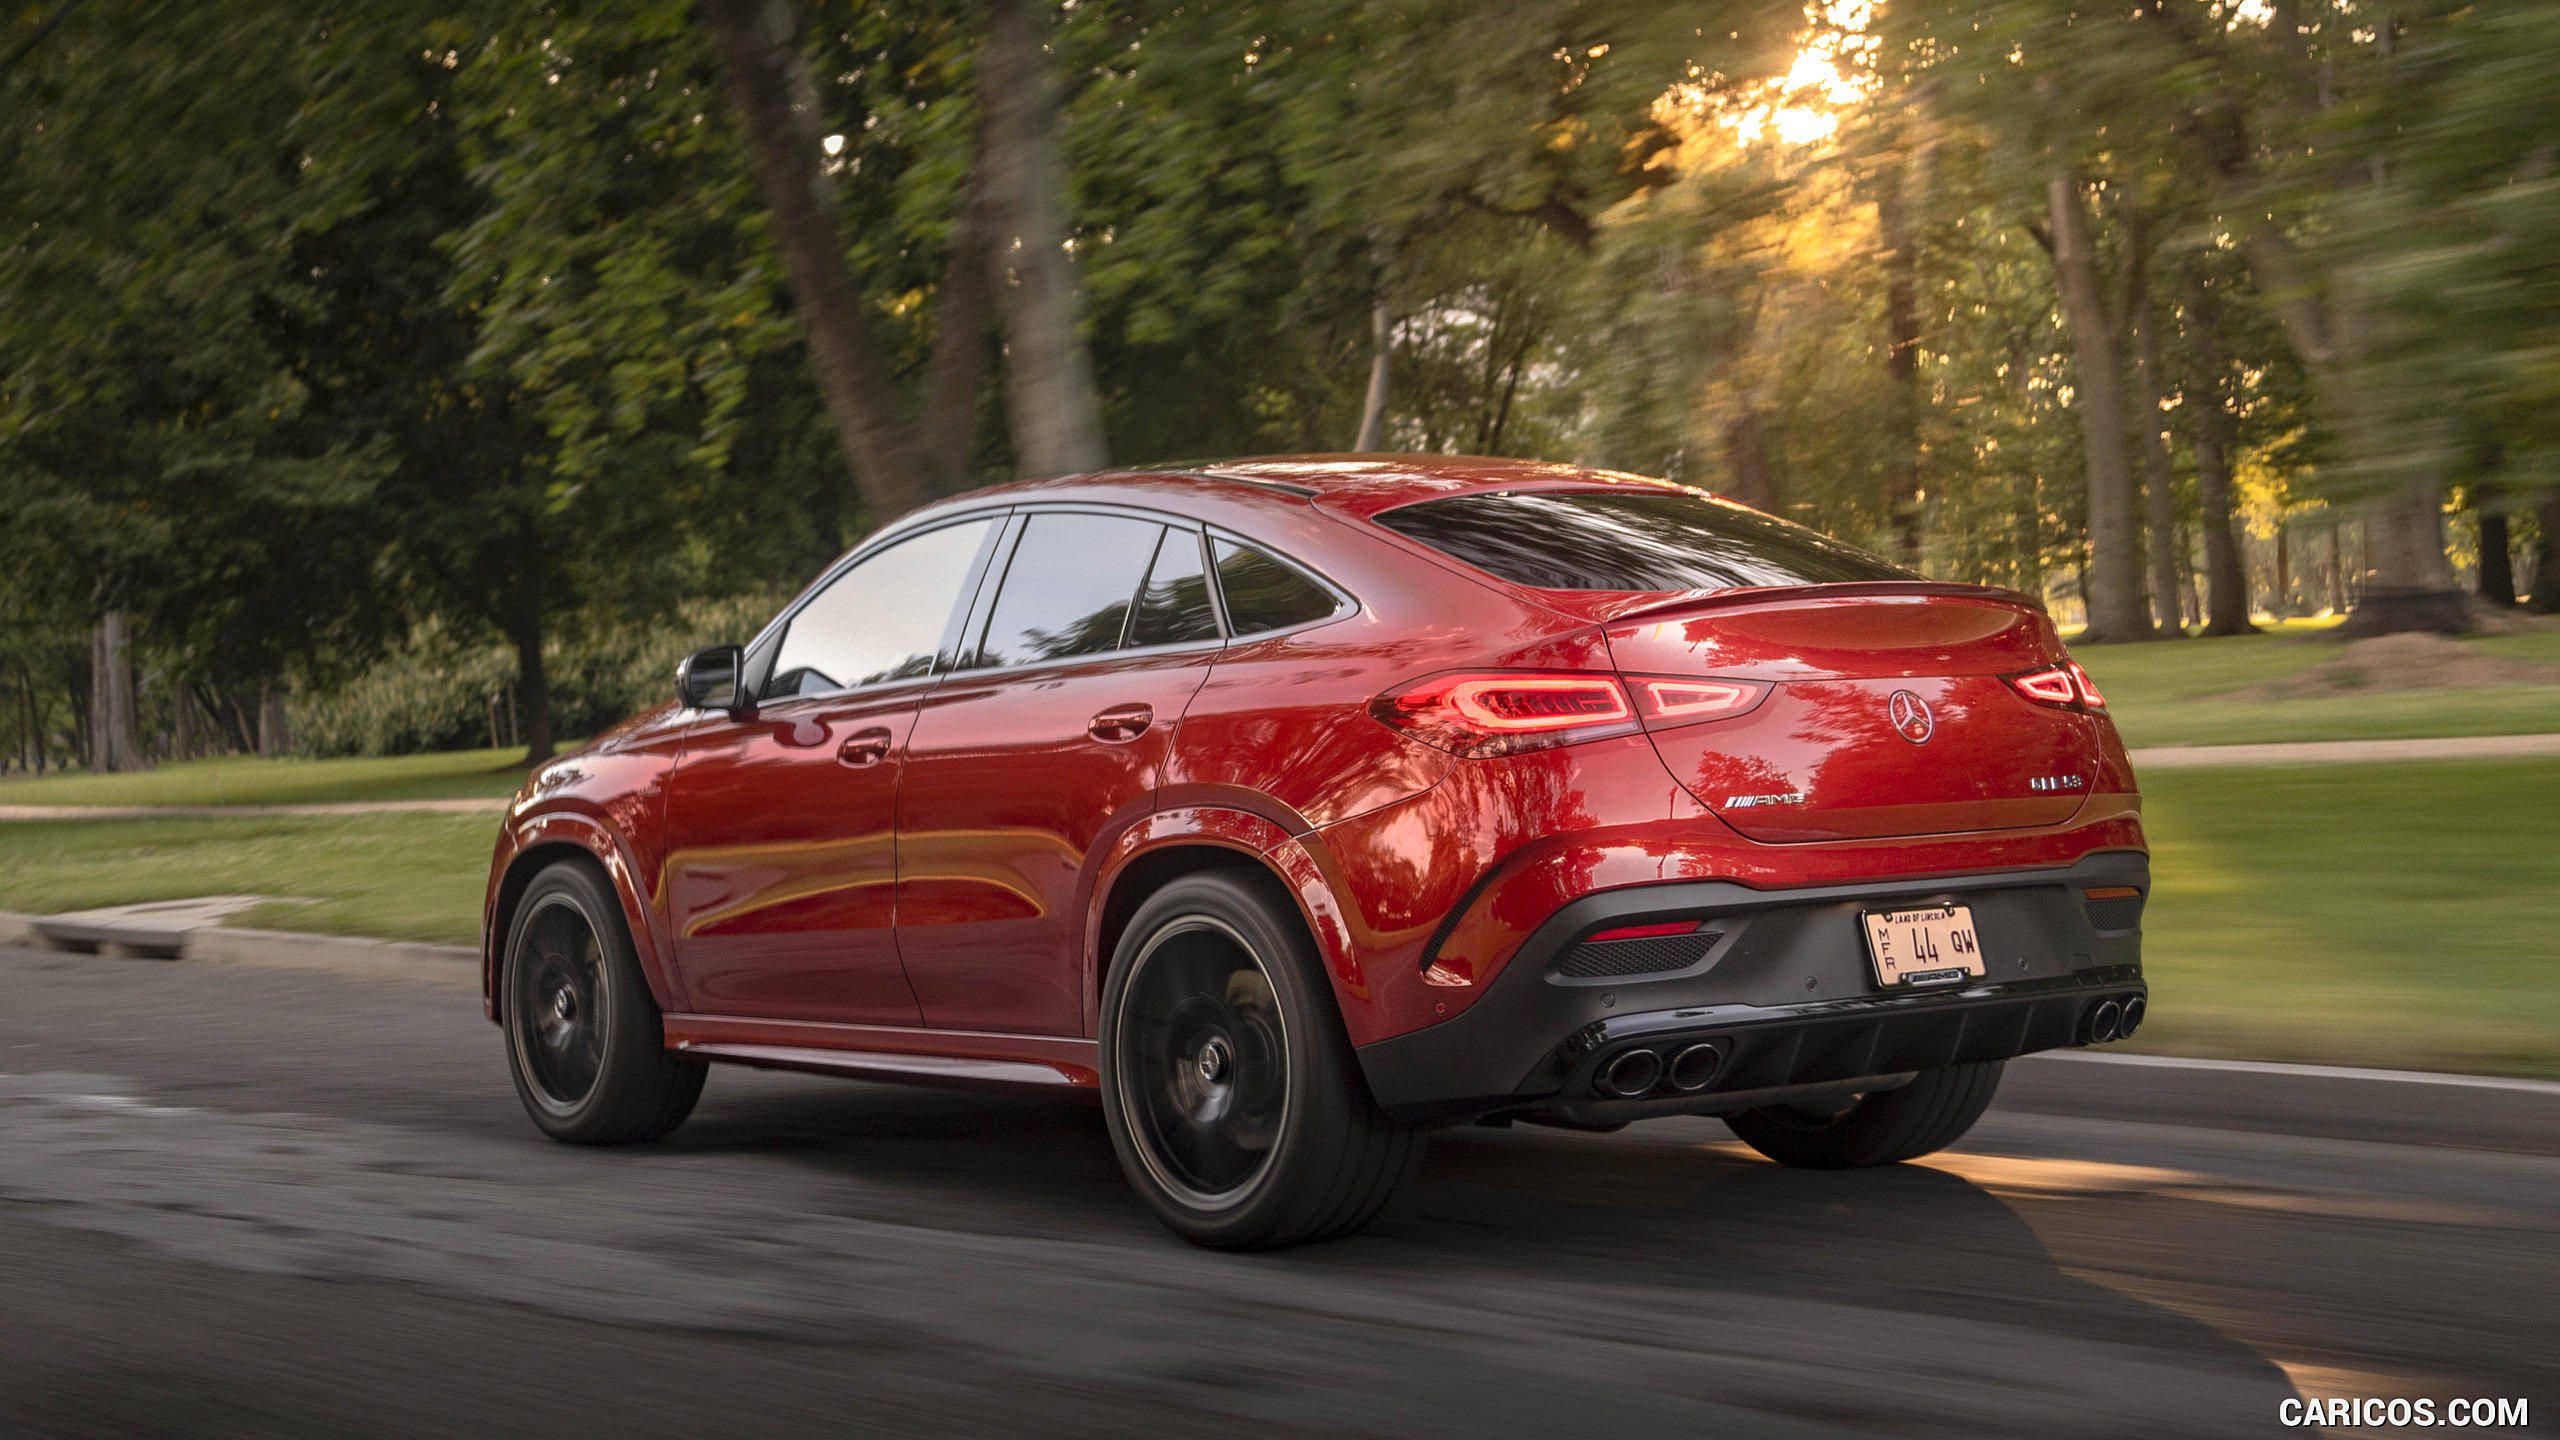 2021 Mercedes-AMG GLE 53 Coupe - Rear Three-Quarter, #108 of 178